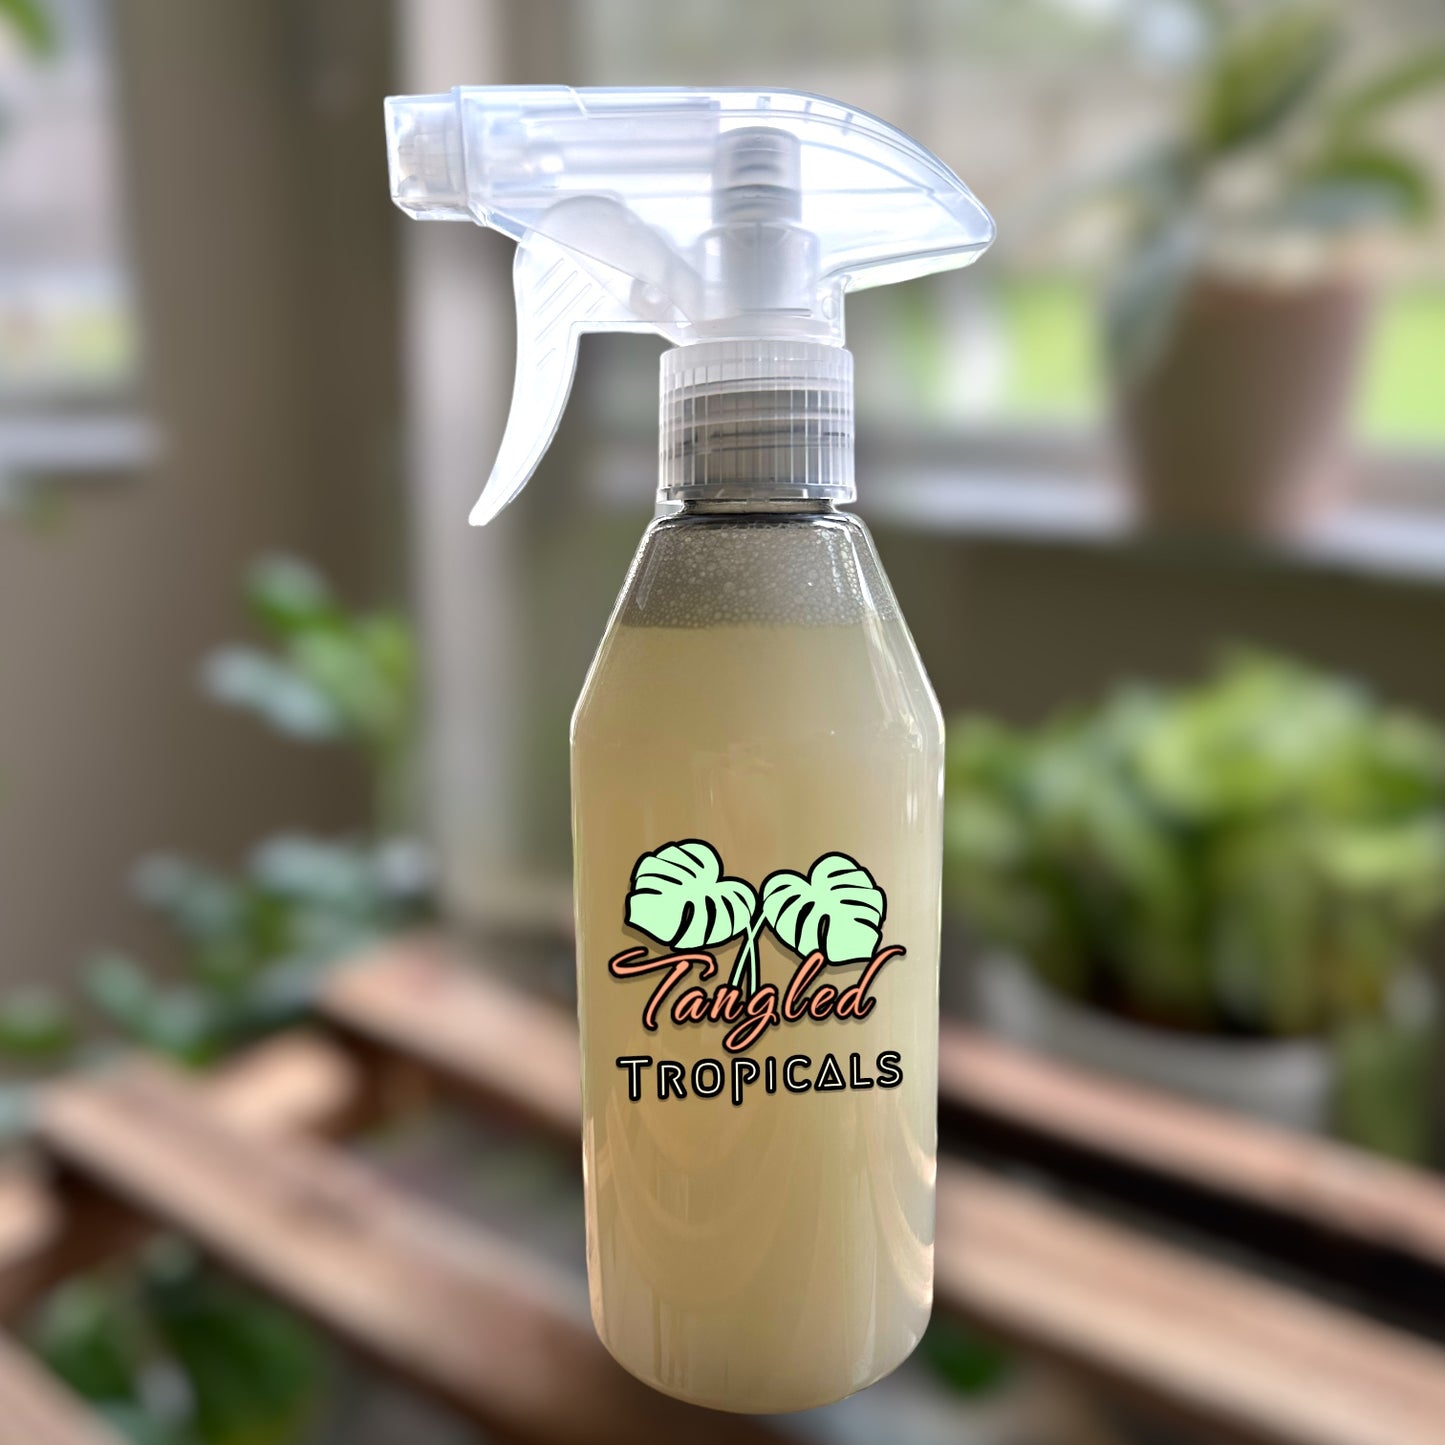 Tangled Tropicals Insecticidal Spray 10Fl. Oz